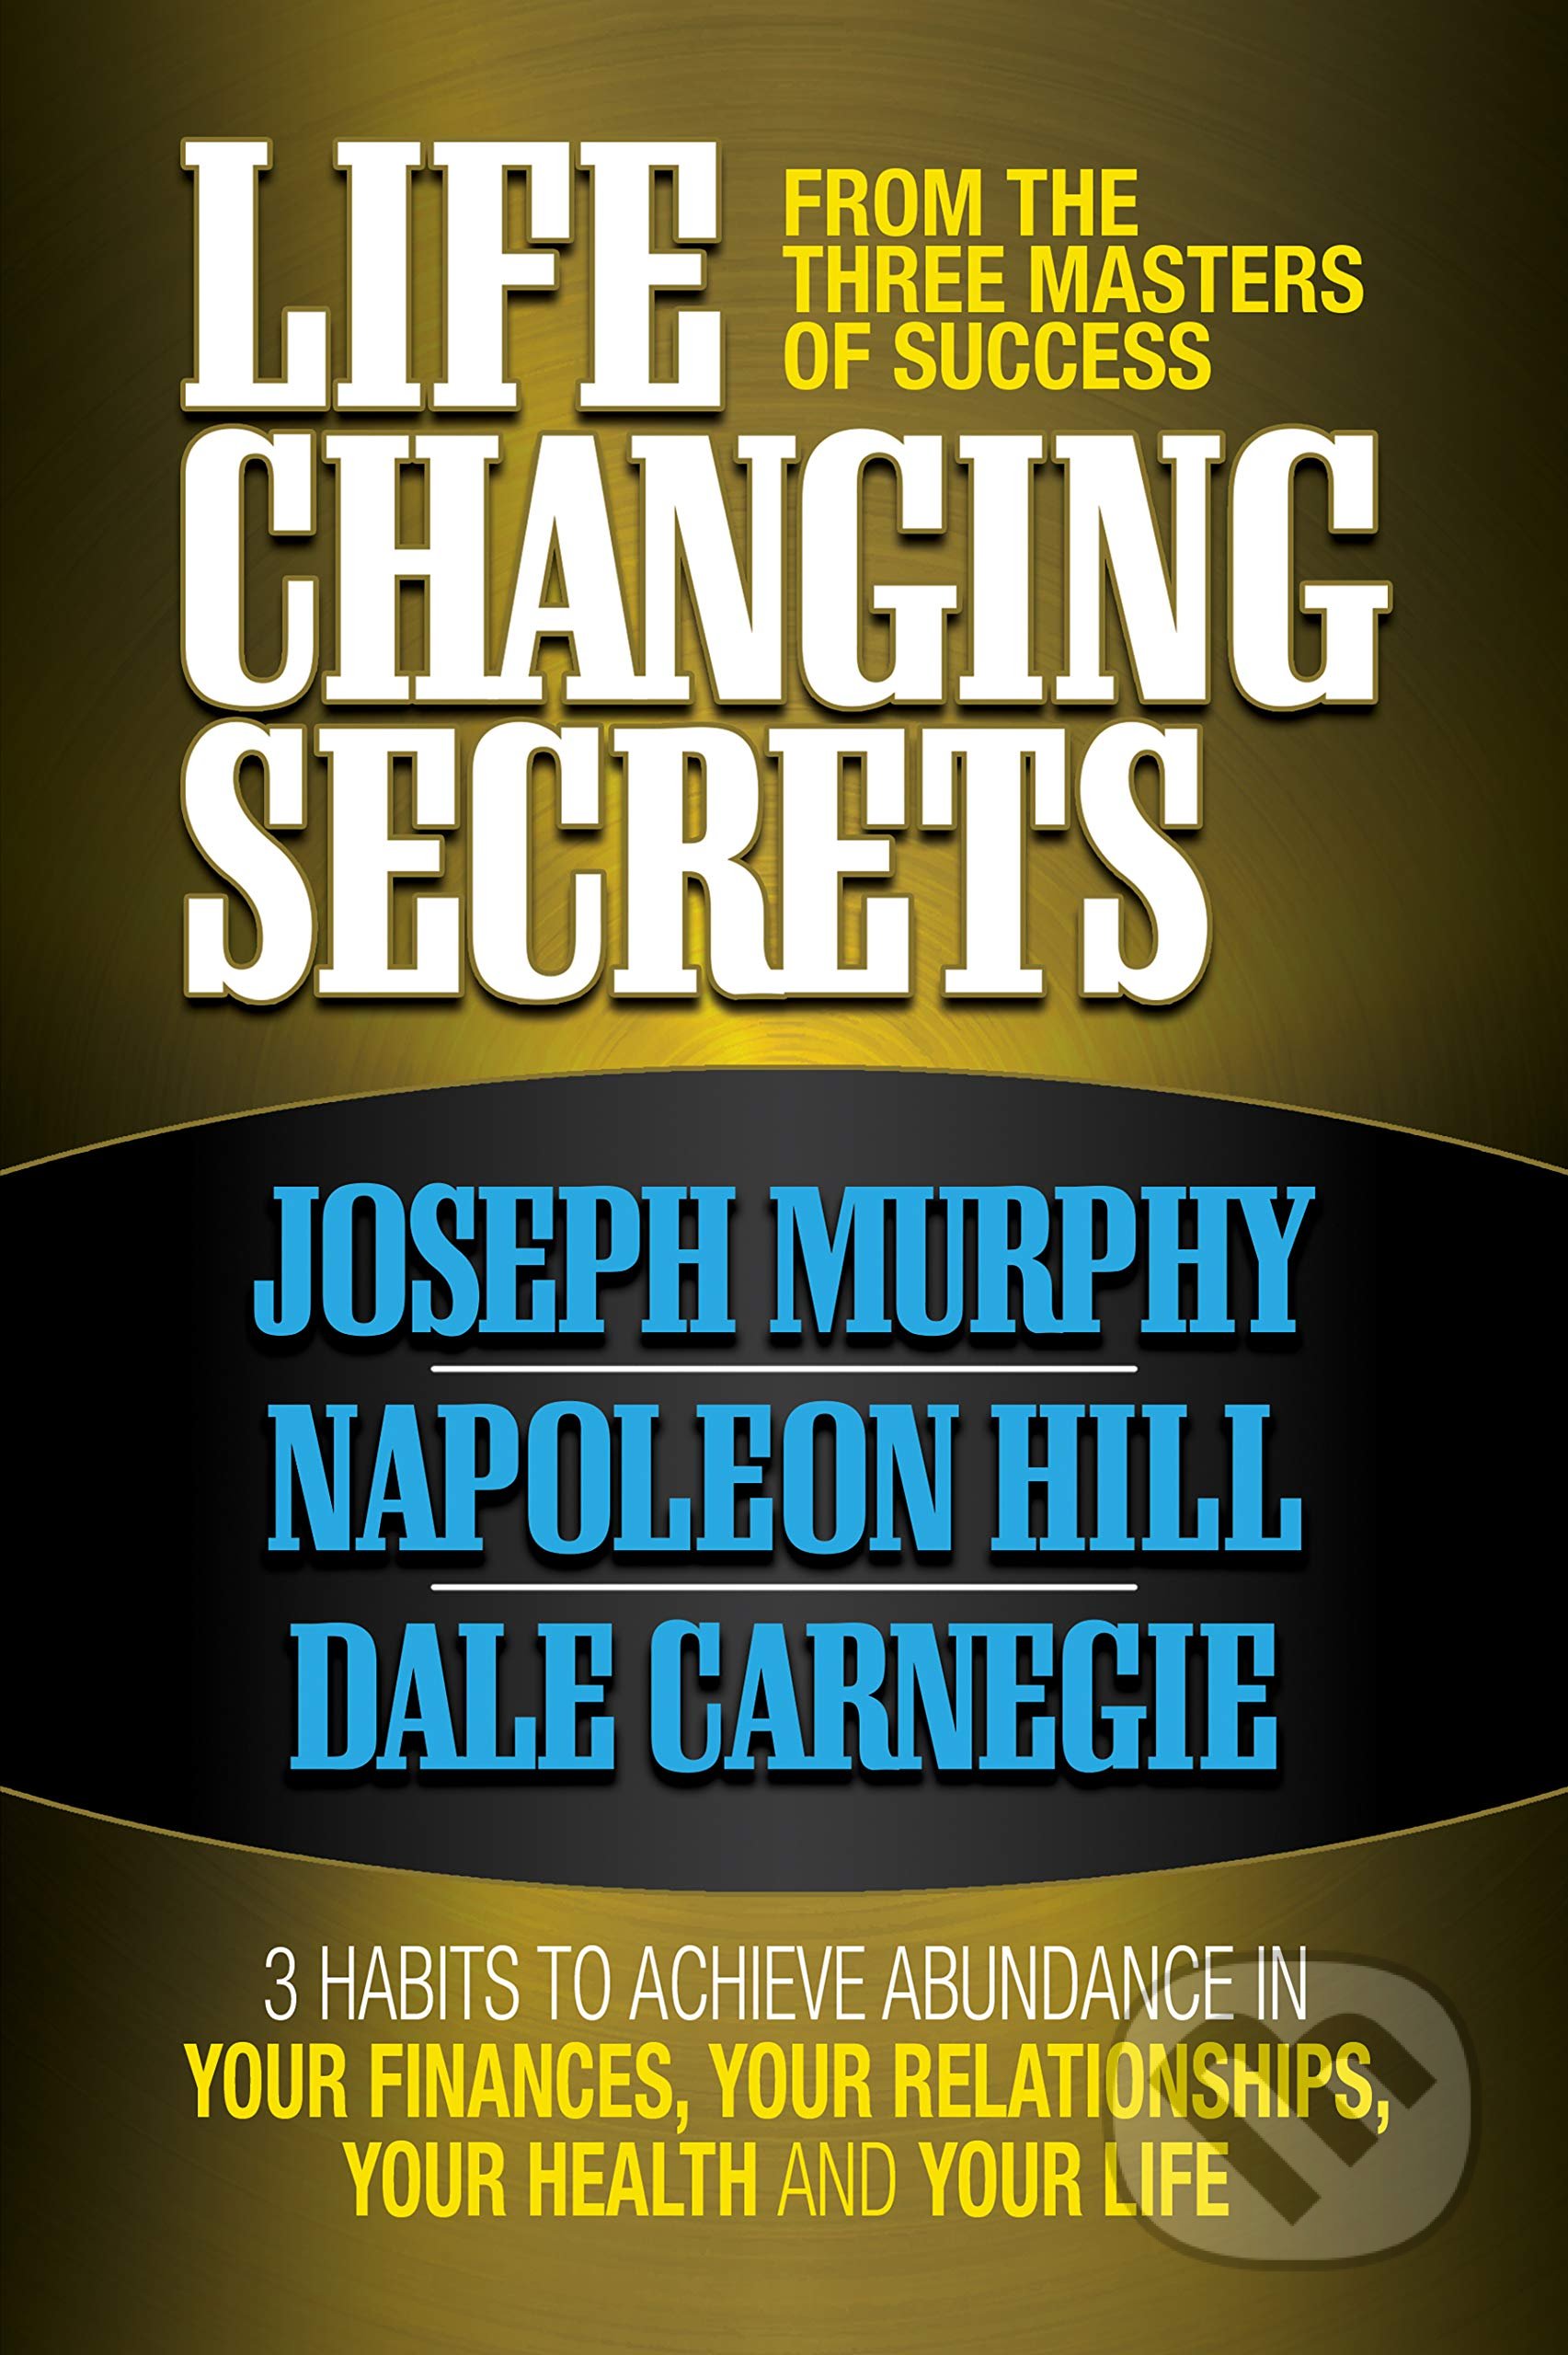 Life Changing Secrets From the Three Masters of Success - Joseph Murphy, Napoleon Hill, Dale Carnegie, G&D Media, 2019